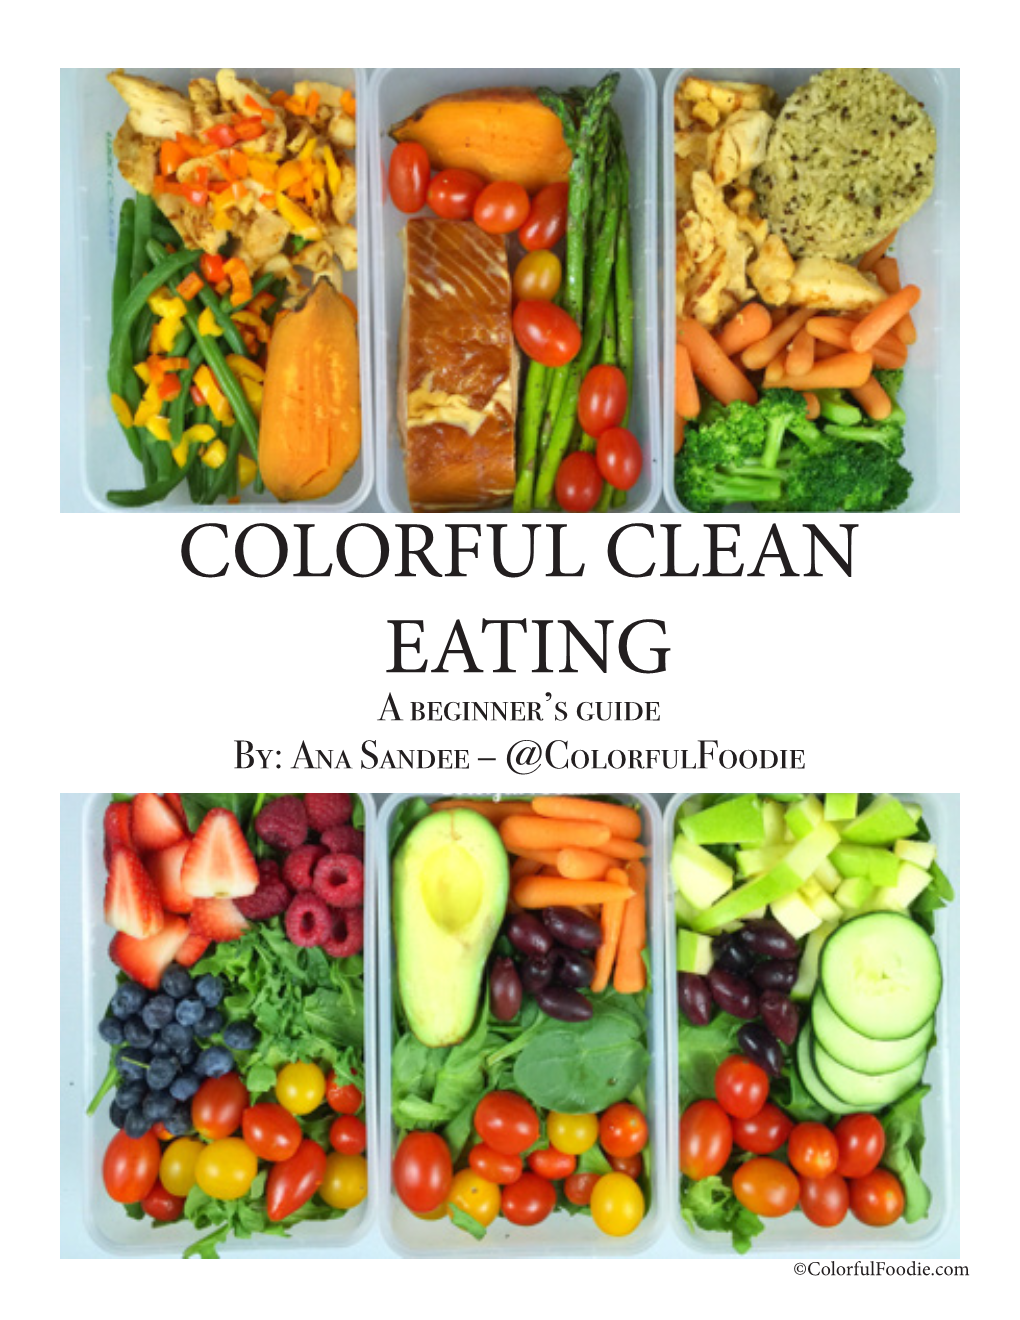 COLORFUL CLEAN EATING a Beginner’S Guide By: Ana Sandee – @Colorfulfoodie